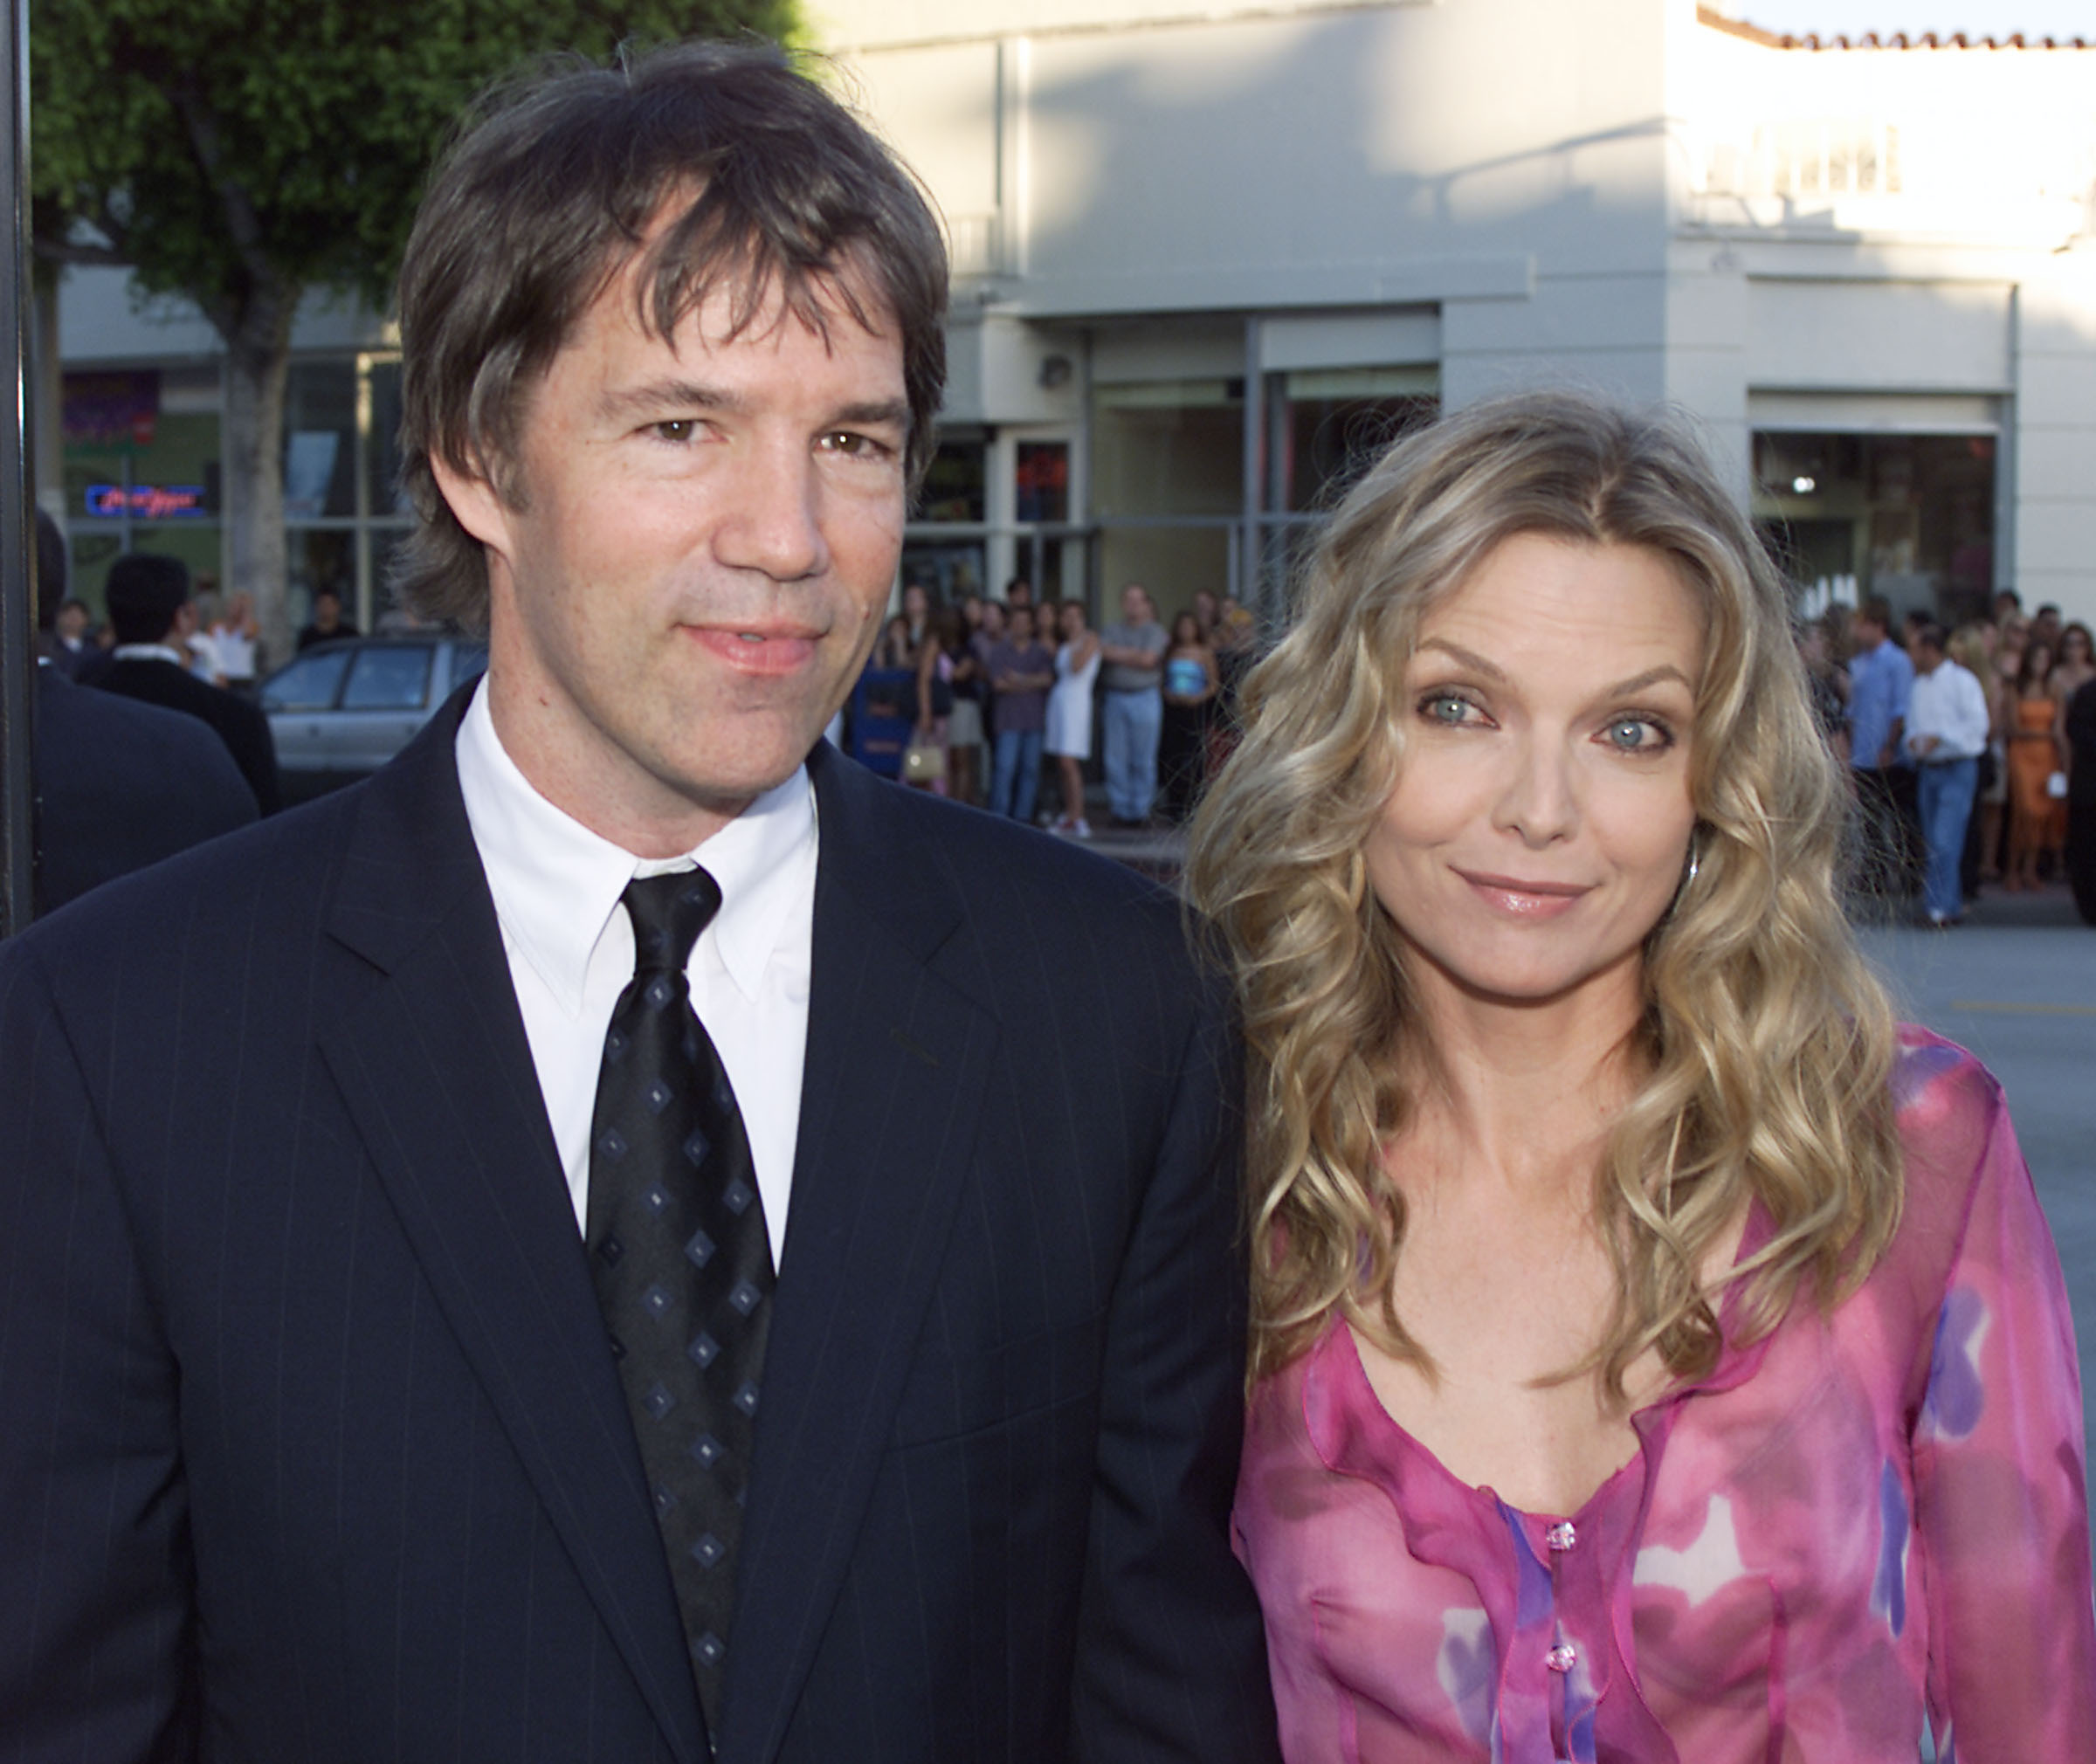 David E. Kelley and Michelle Pfeiffer at the premiere of "What Lies Beneath" in Los Angeles, California, on July 18, 2000 | Source: Getty Images